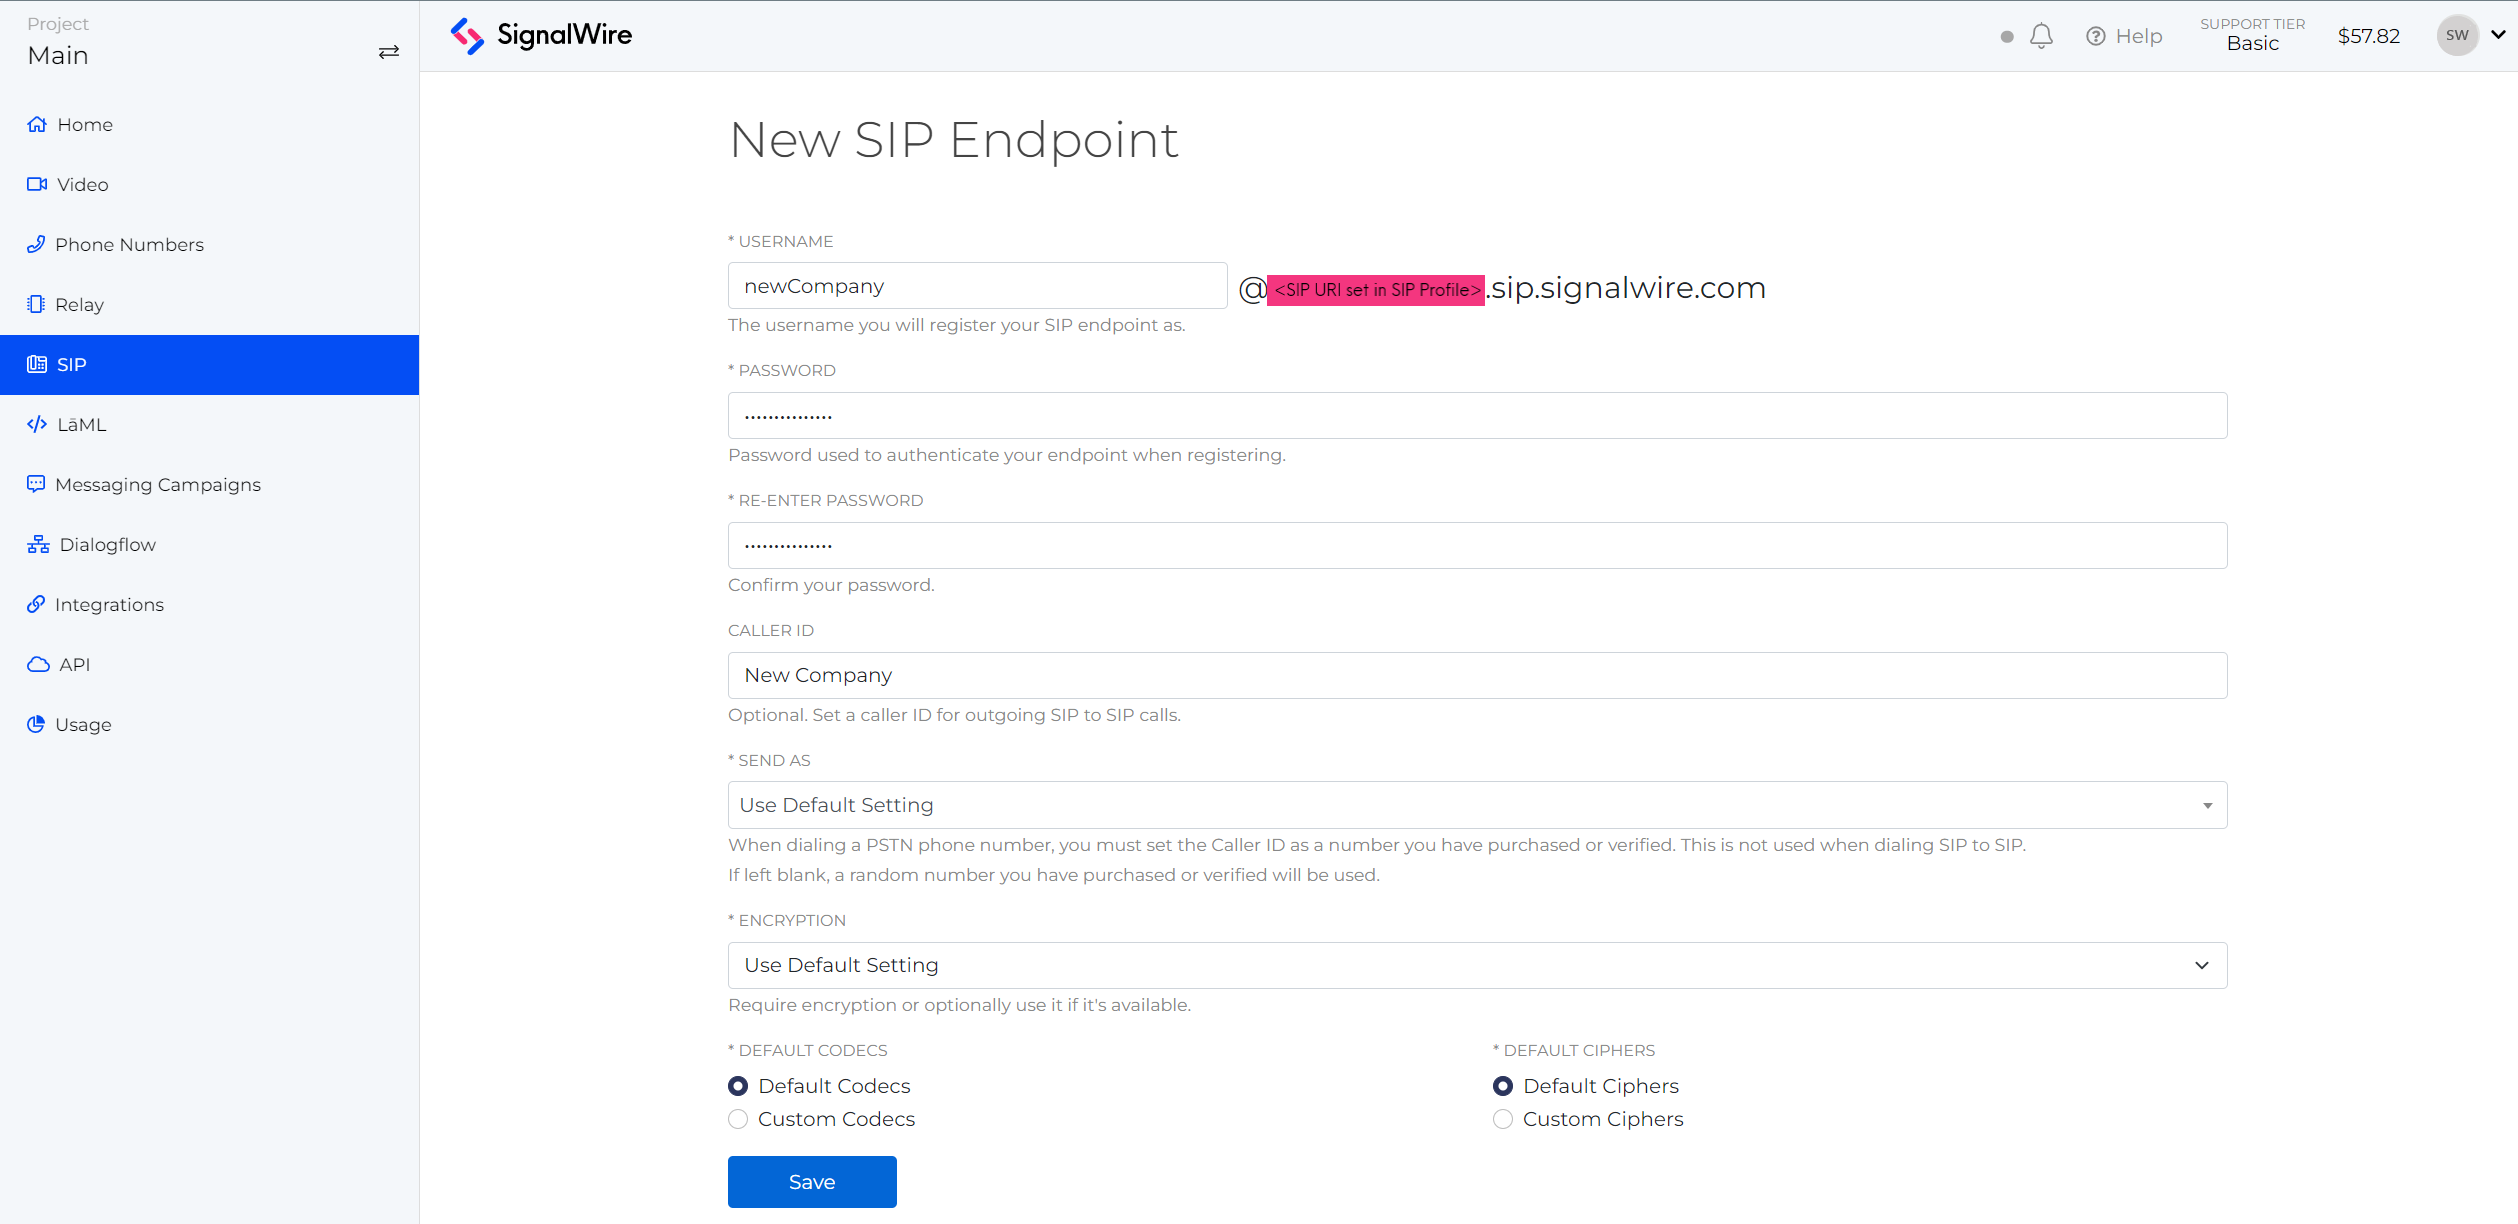 A screenshot of the New SIP Endpoint page in the SIP tab of a SignalWire Space, configured to match the linked guide to creating a SIP endpoint in a SignalWire Space.